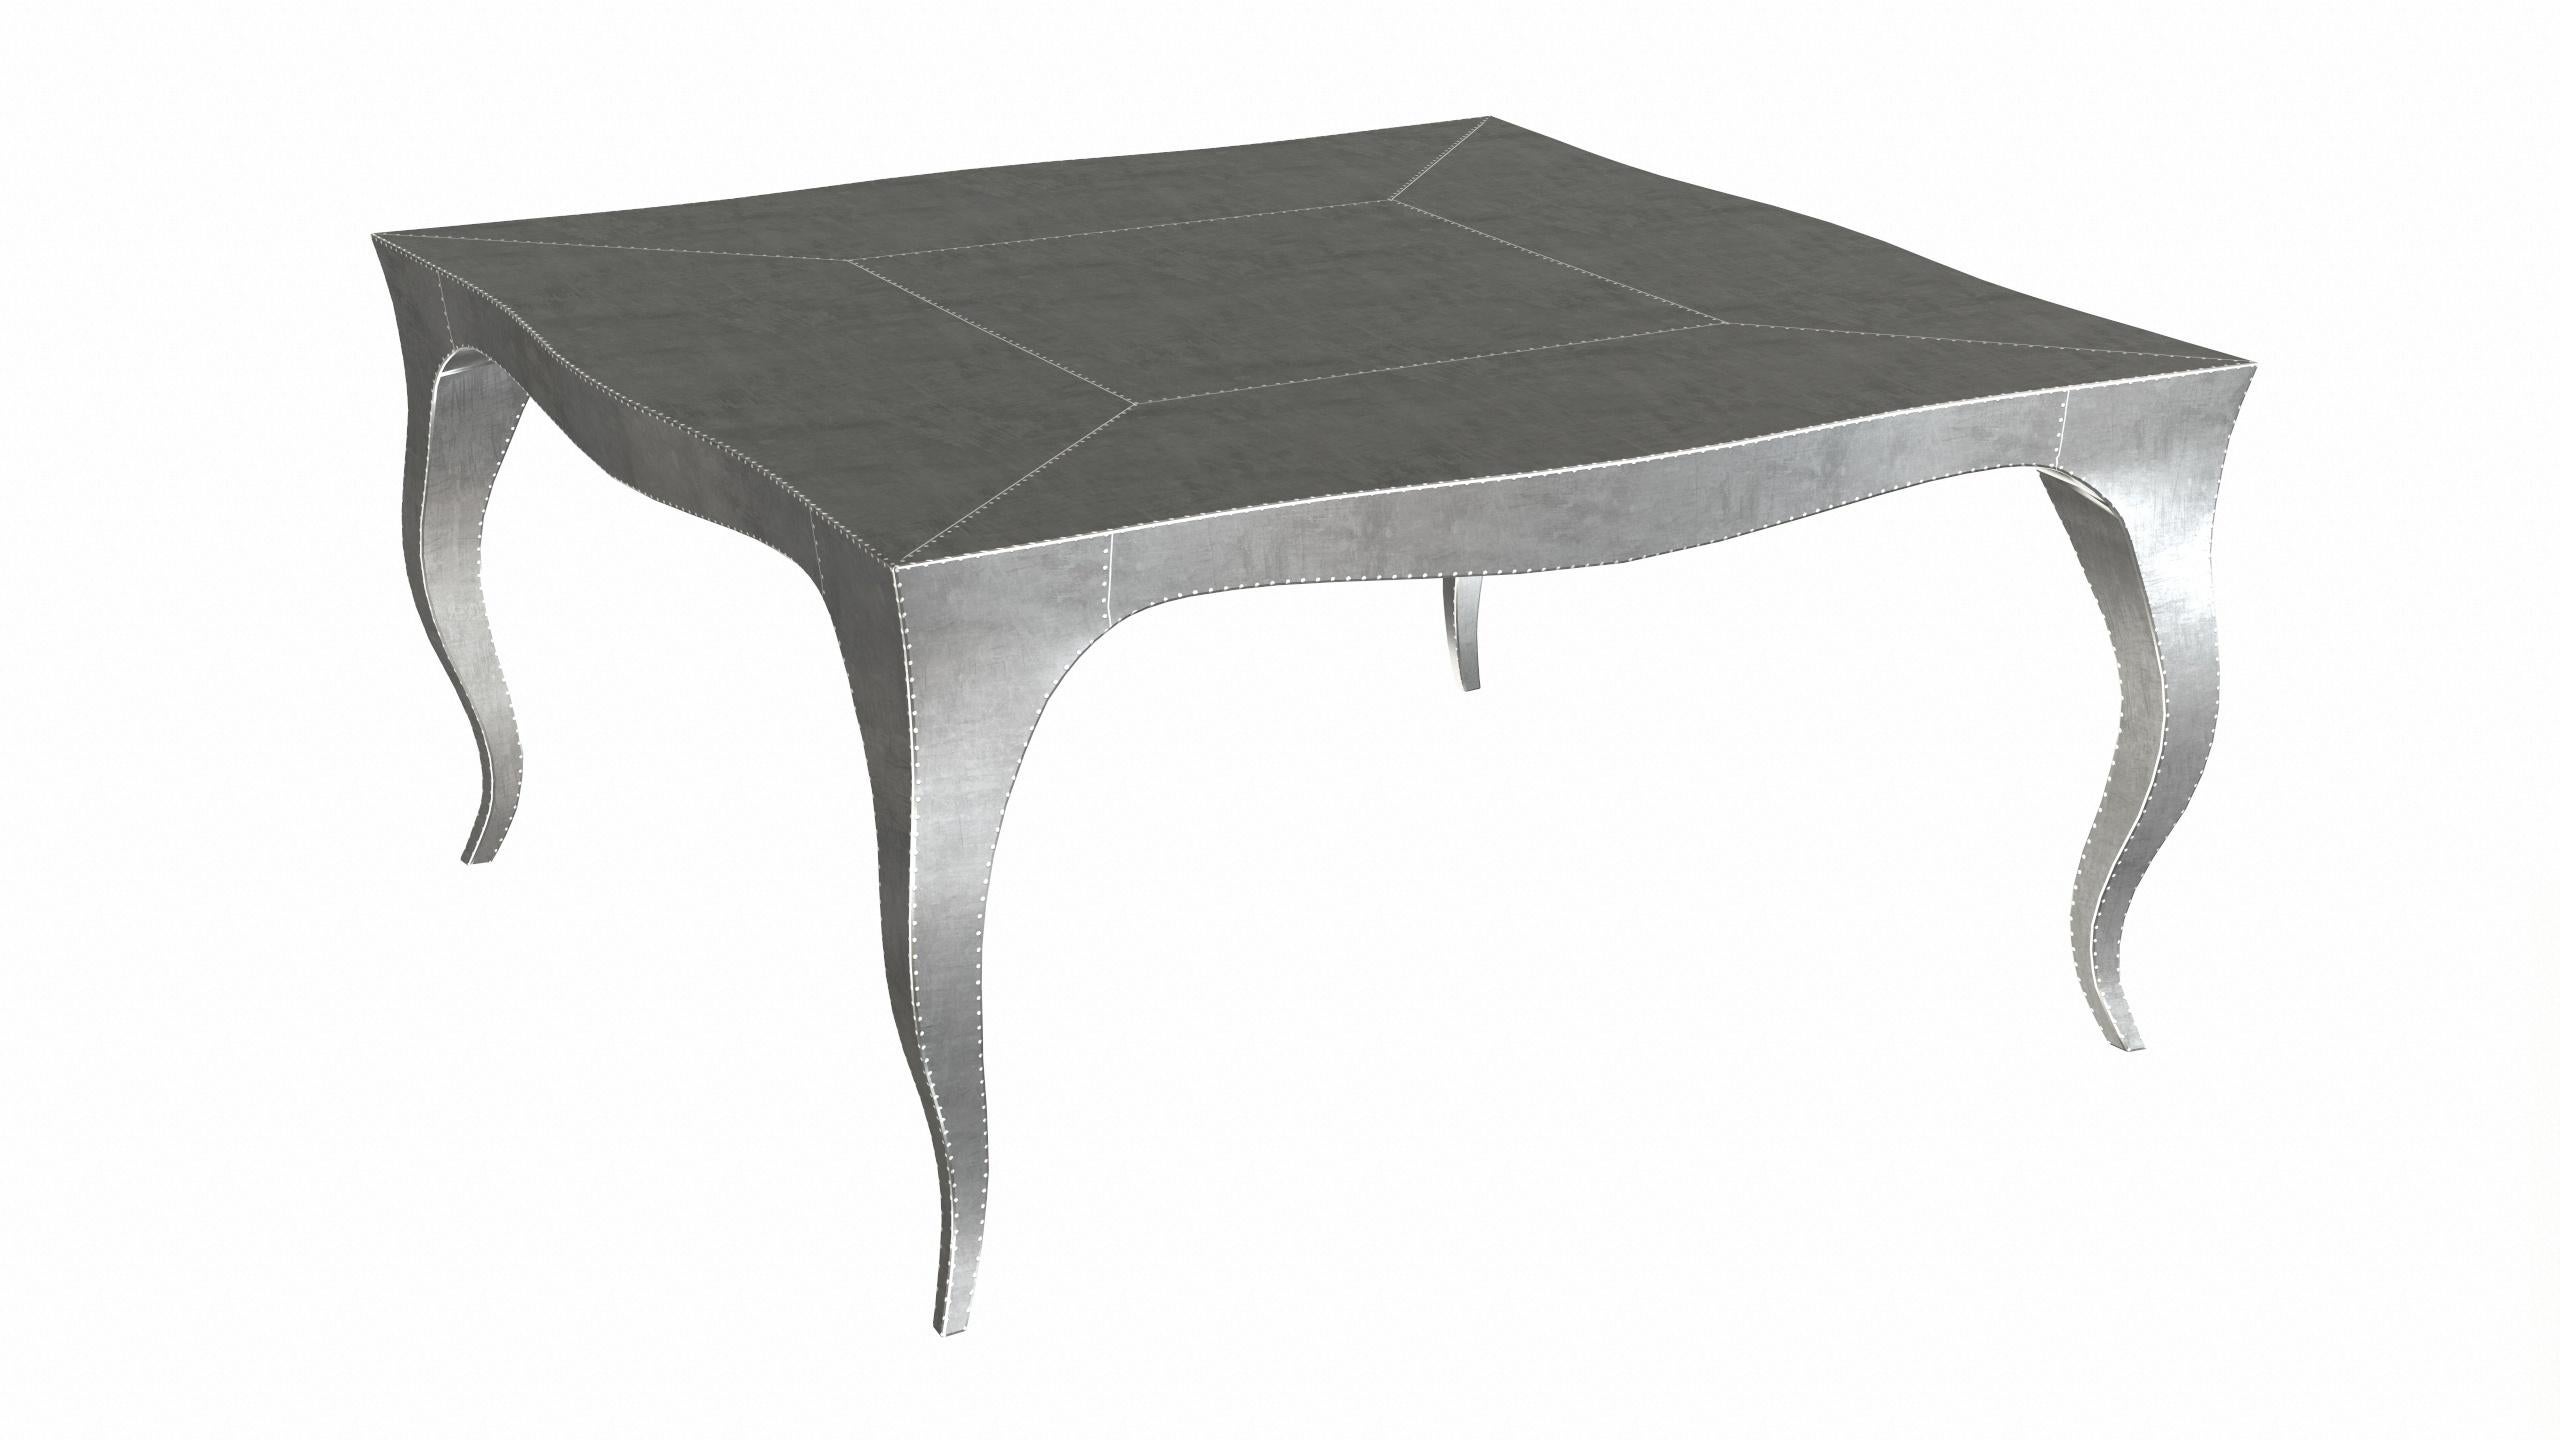 American Louise Art Deco Nesting Tables Smooth White Bronze 18.5x18.5x10 inch by Paul M. For Sale